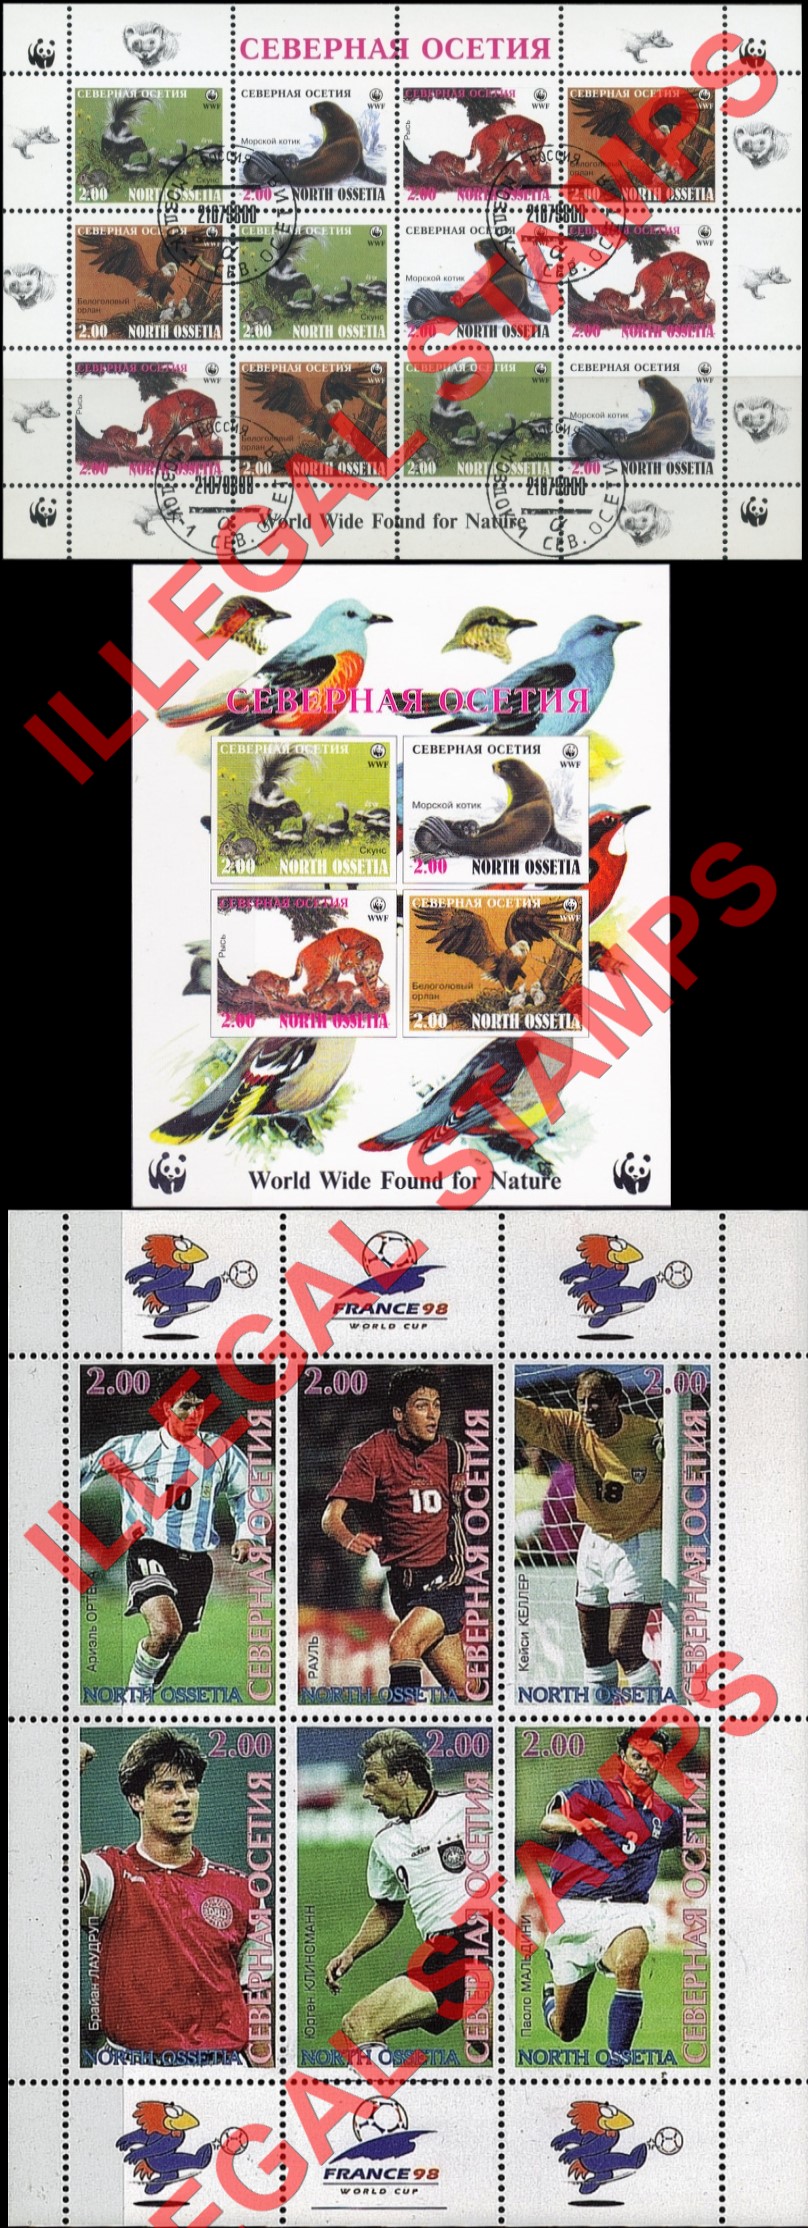 North Ossetia 1998 Counterfeit Illegal Stamps (Part 2)